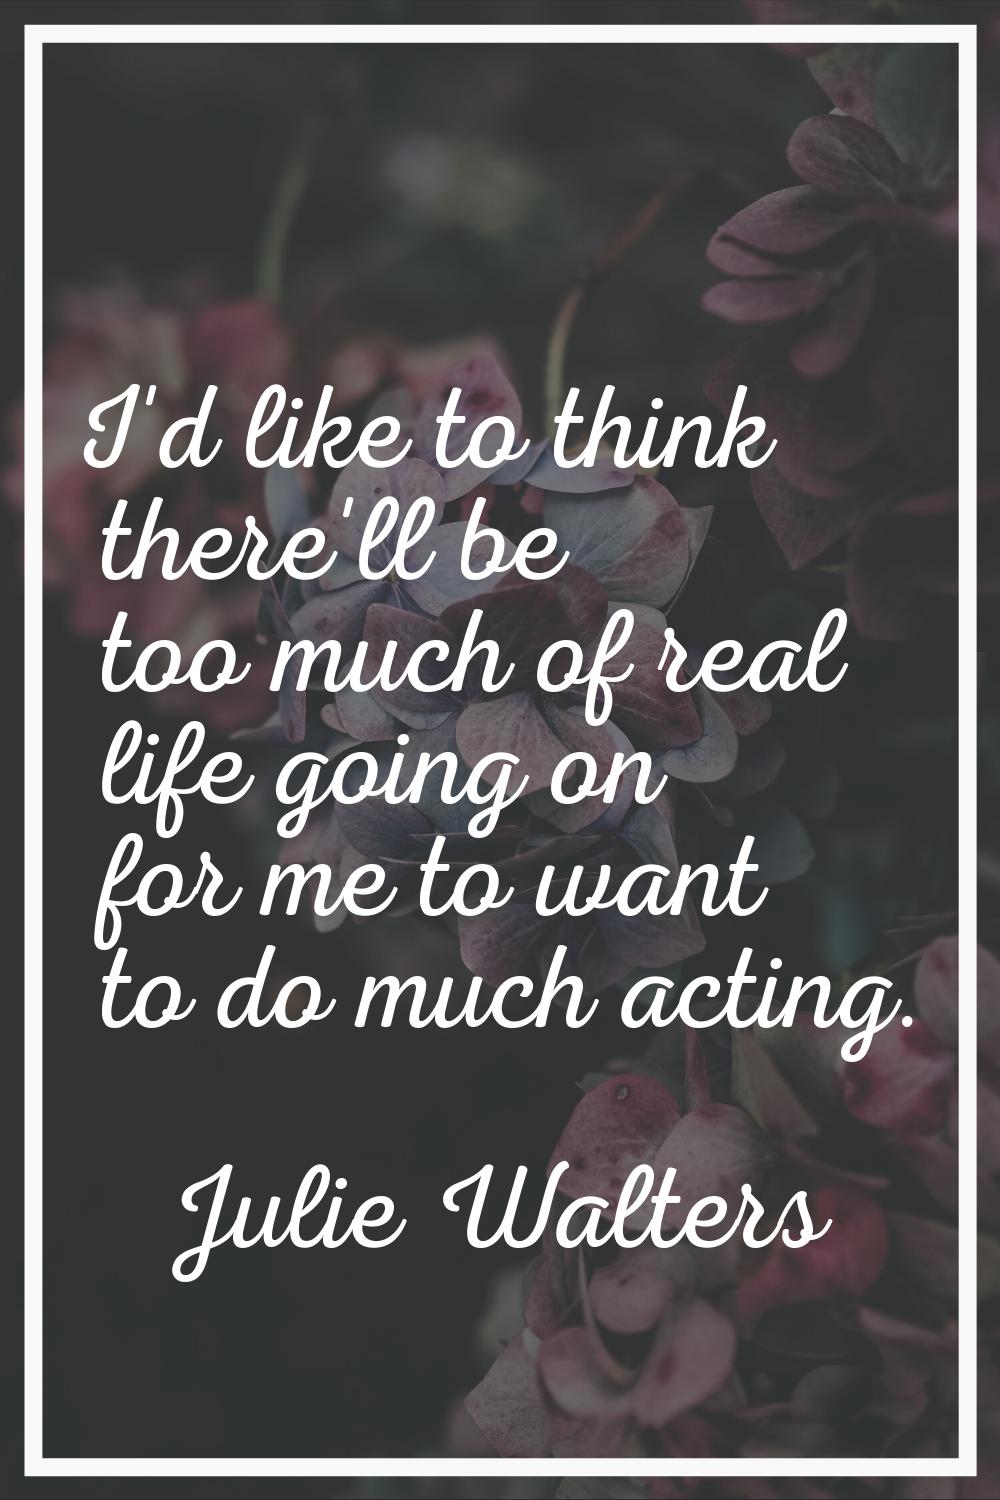 I'd like to think there'll be too much of real life going on for me to want to do much acting.